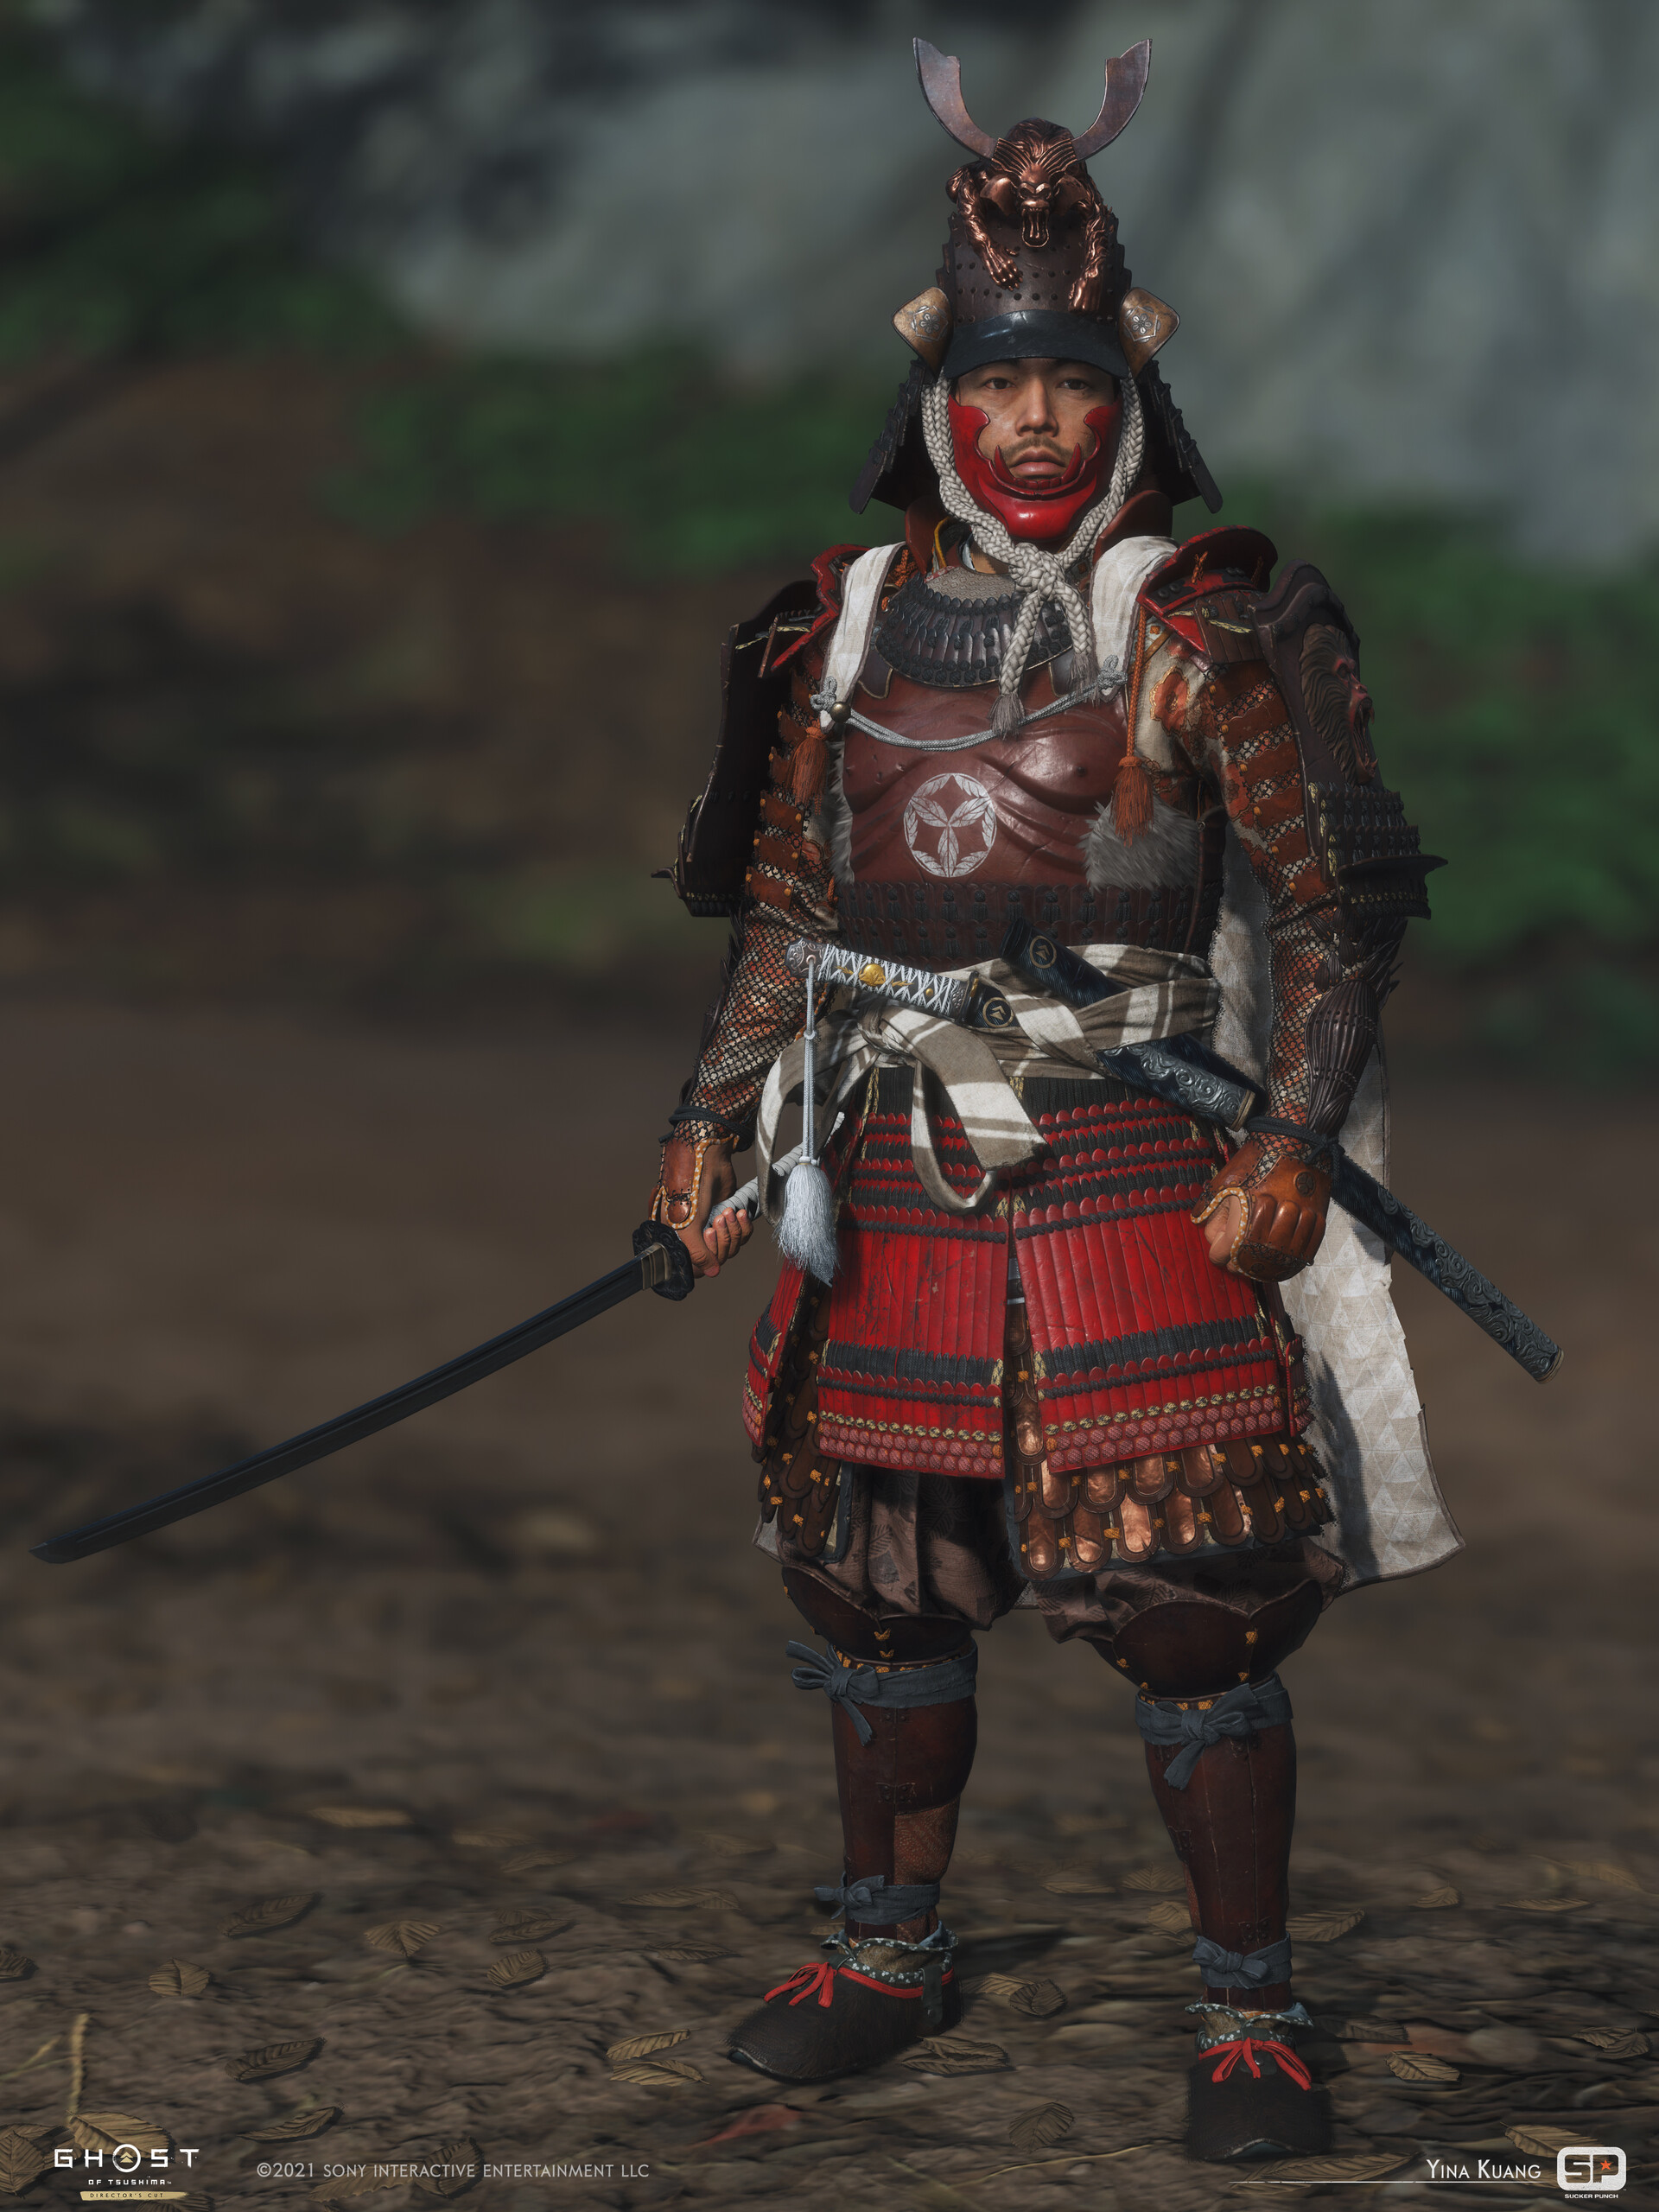 Man I love the new armor dyes and accessories! : r/ghostoftsushima